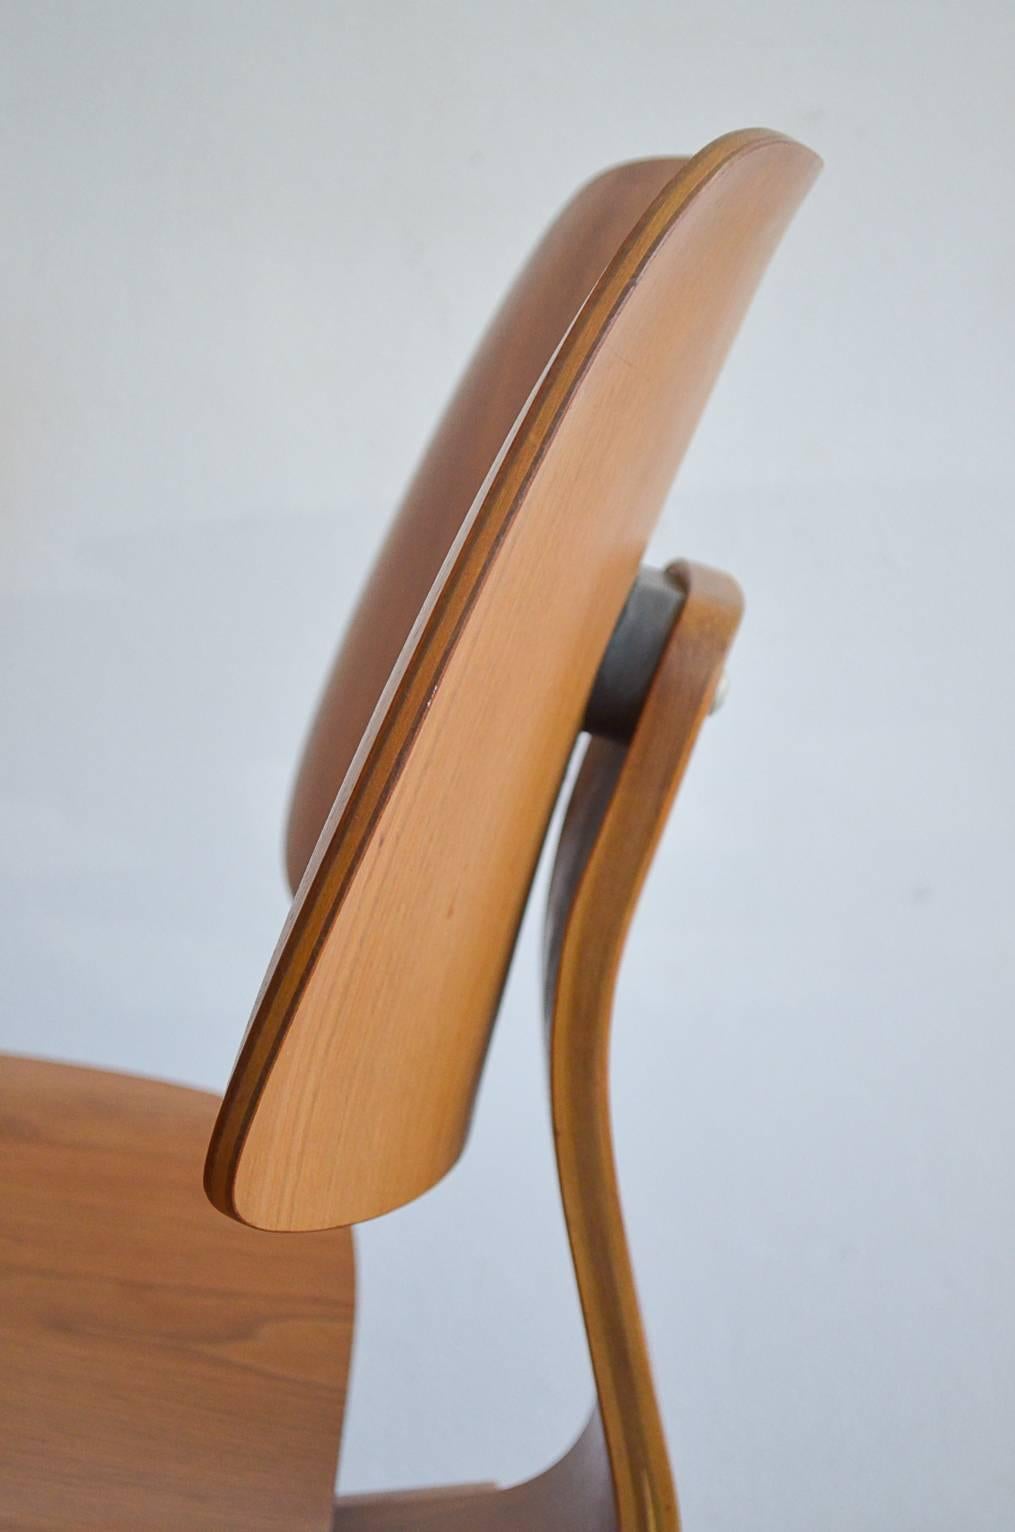 bent wood chairs